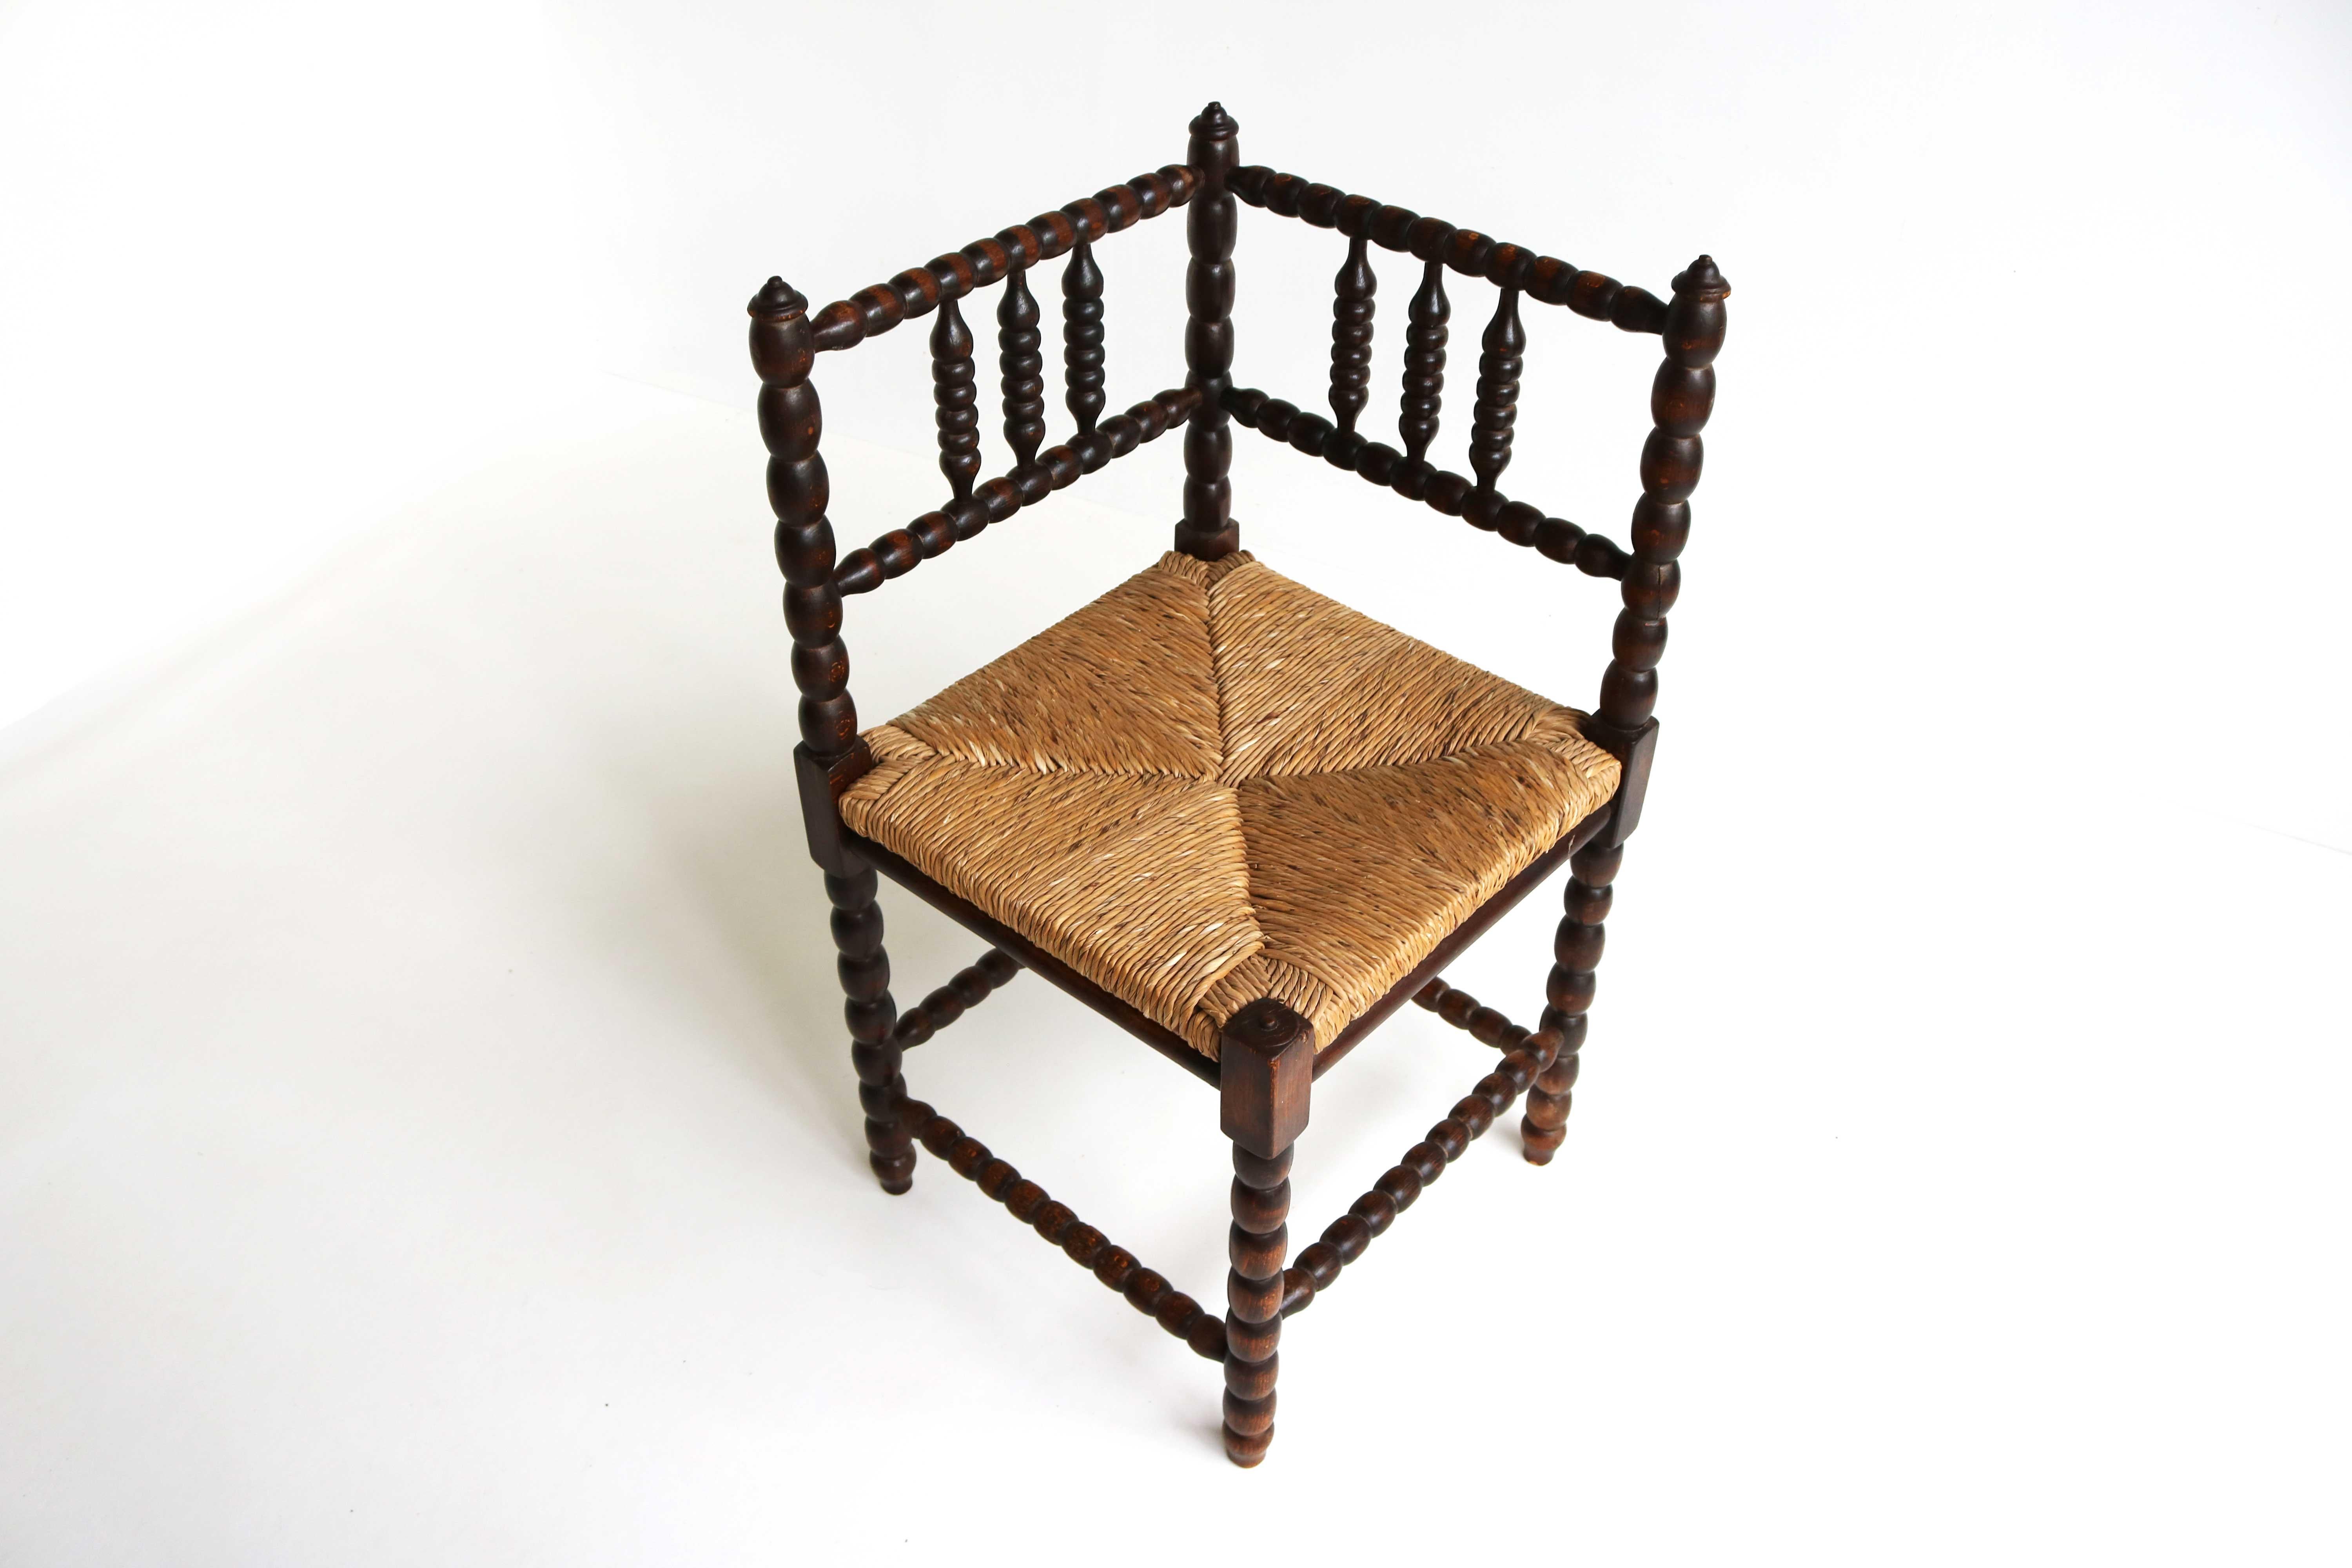  Antique Dutch Rush- Seat  Bobbin Corner Chair , Turned Wood Side Chair and Cane 1900s, Country Living, Farmhouse Decor.

Beautiful Dutch bobbin corner chair , from the 1900s. 
This antique 'corner chair' with wicker seat is originally a typical Old